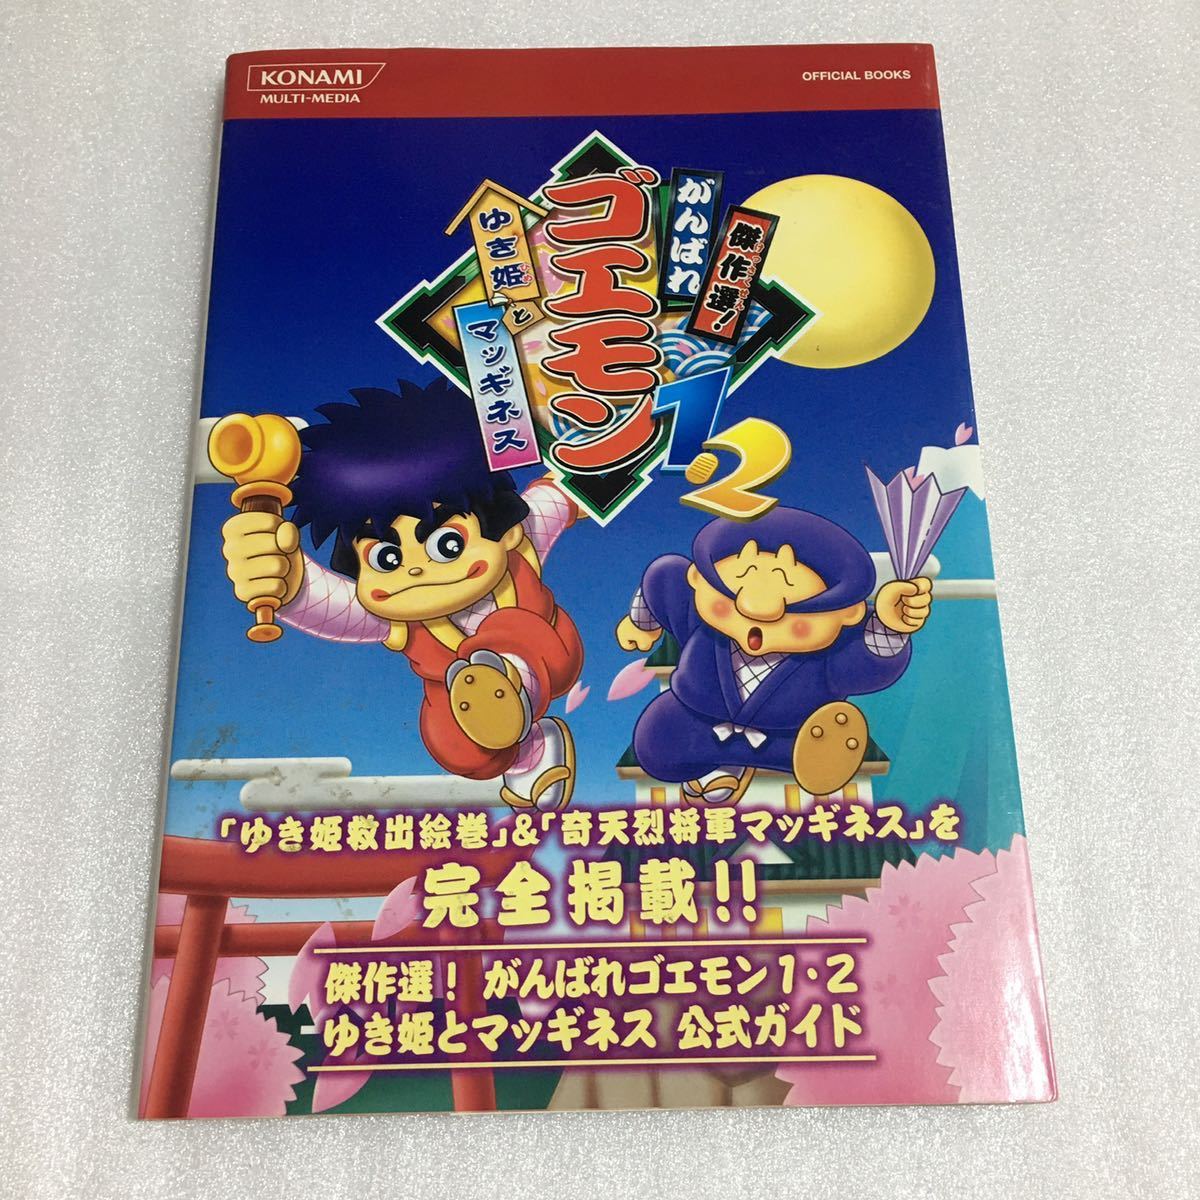 GBA がんばれゴエモン1・2 ゆき姫とマッギネス 攻略本セット 公式ガイド Goemon Yukihime and McGuinness  strategy guide set guide